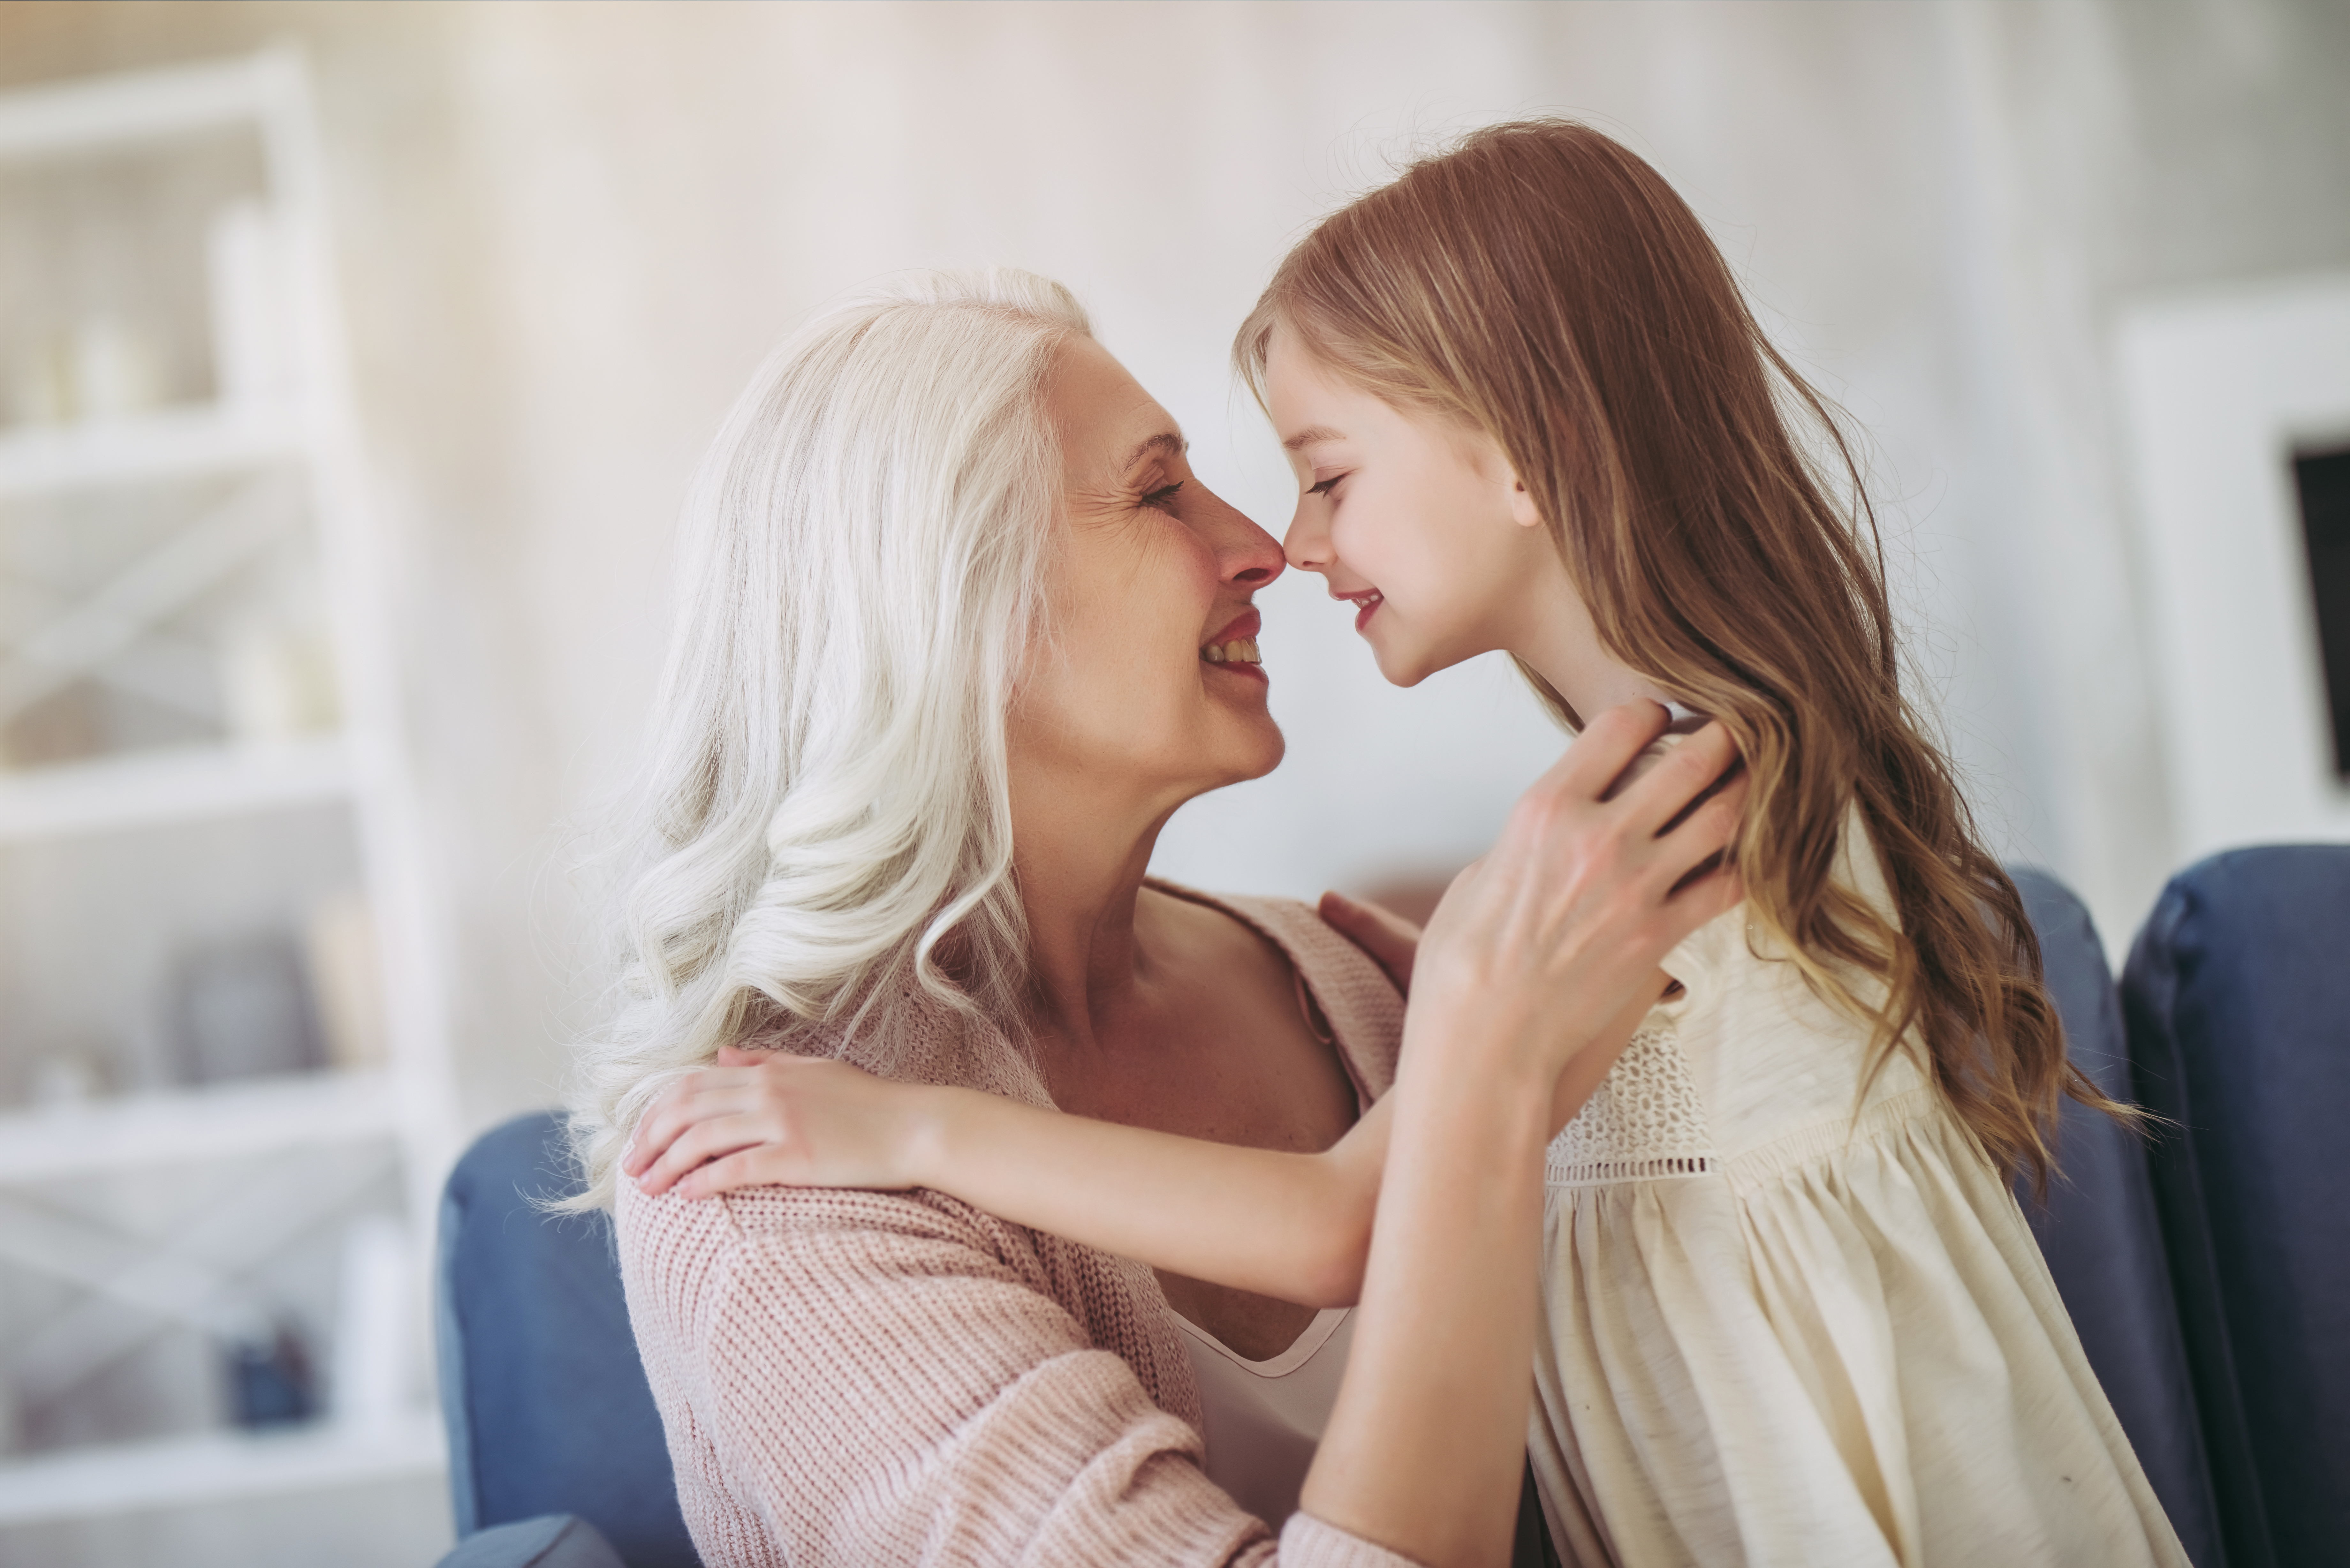 A grandmother spending time with her little granddaughter | Source: Shutterstock